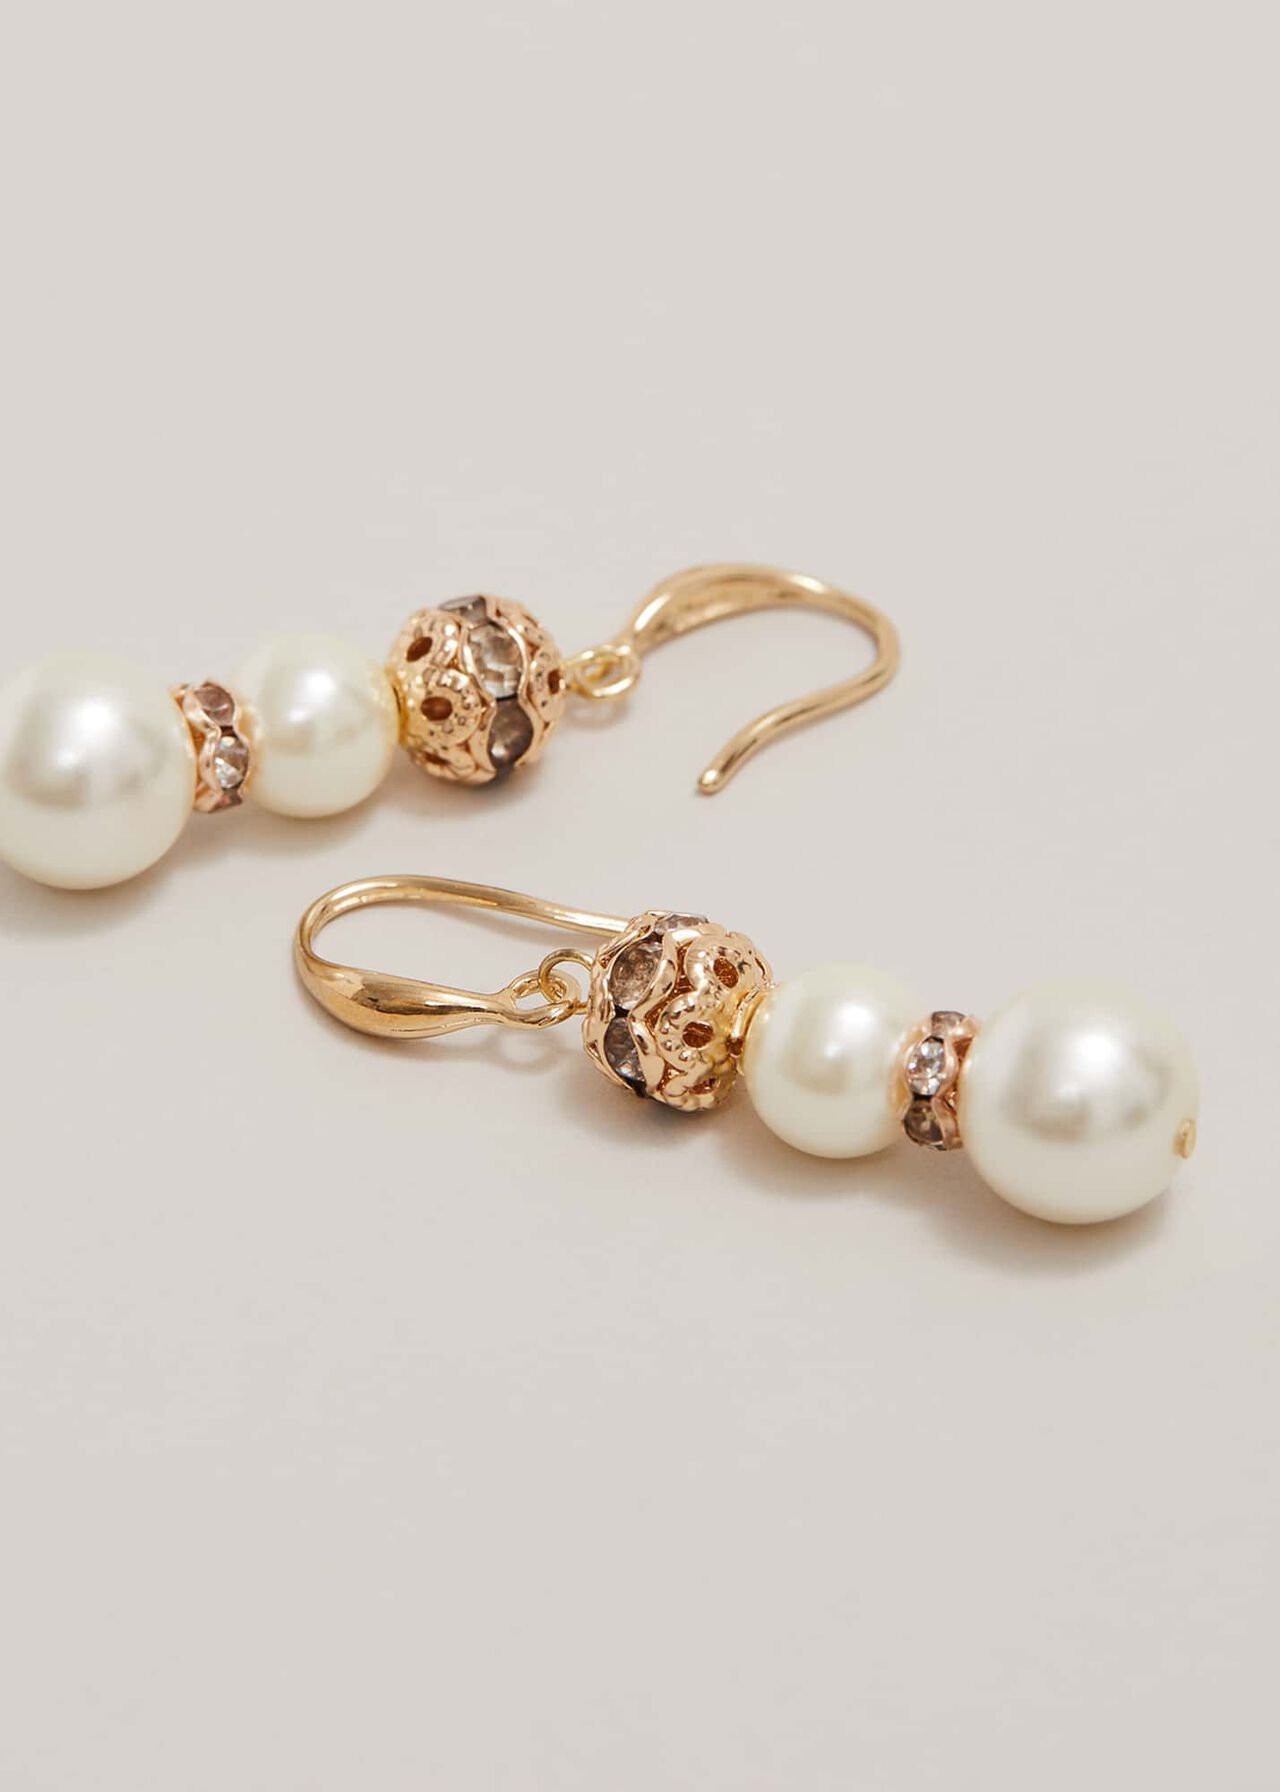 Bead And Pearl Earring